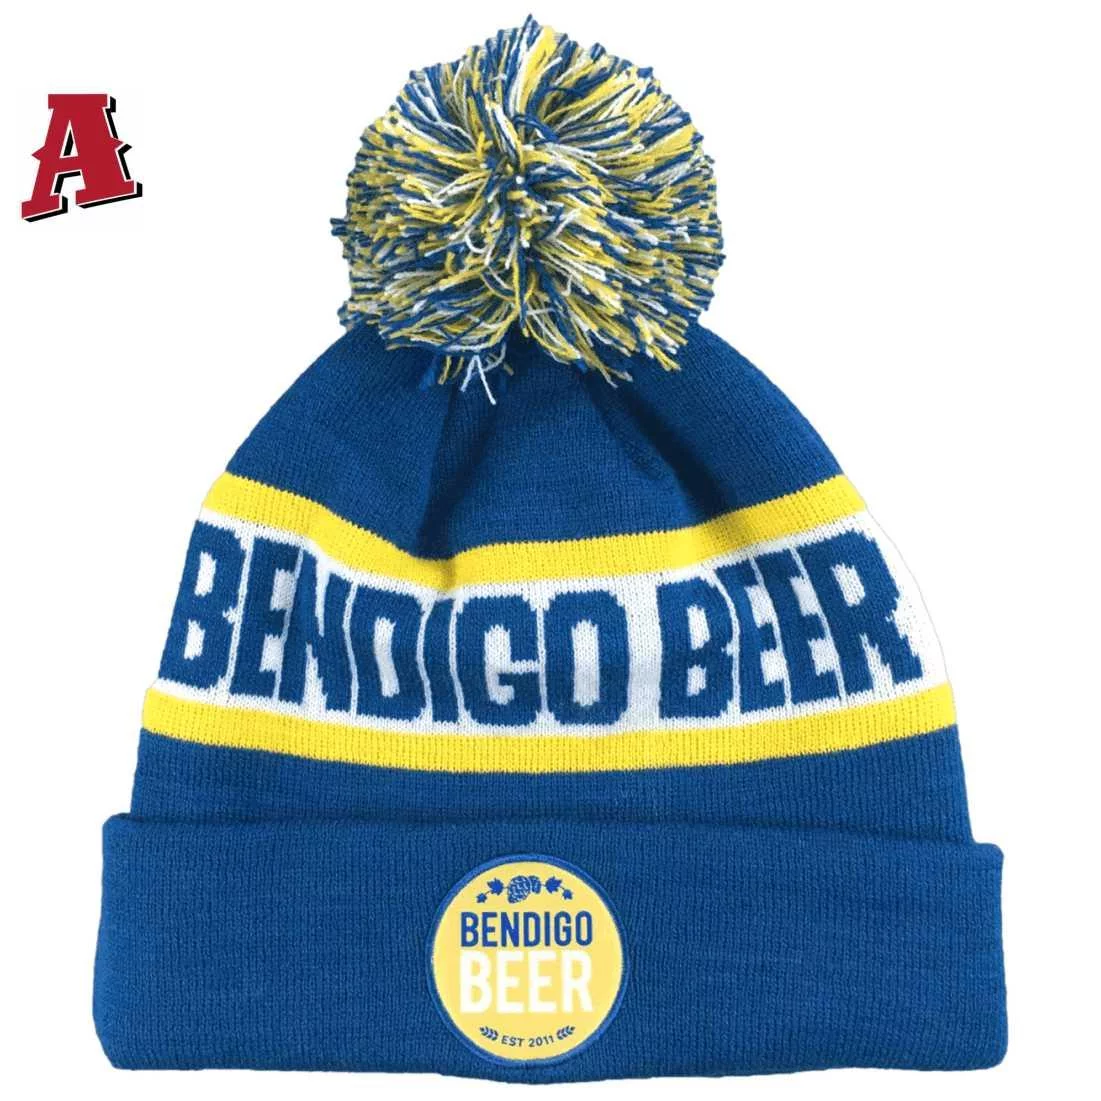 Bendigo Beer Maiden Gully Bendigo Vic Aussie Custom Acrylic Beanie with Pom POM and Roll-up Cuff Royal Blue Yellow White with woven badge on cuff